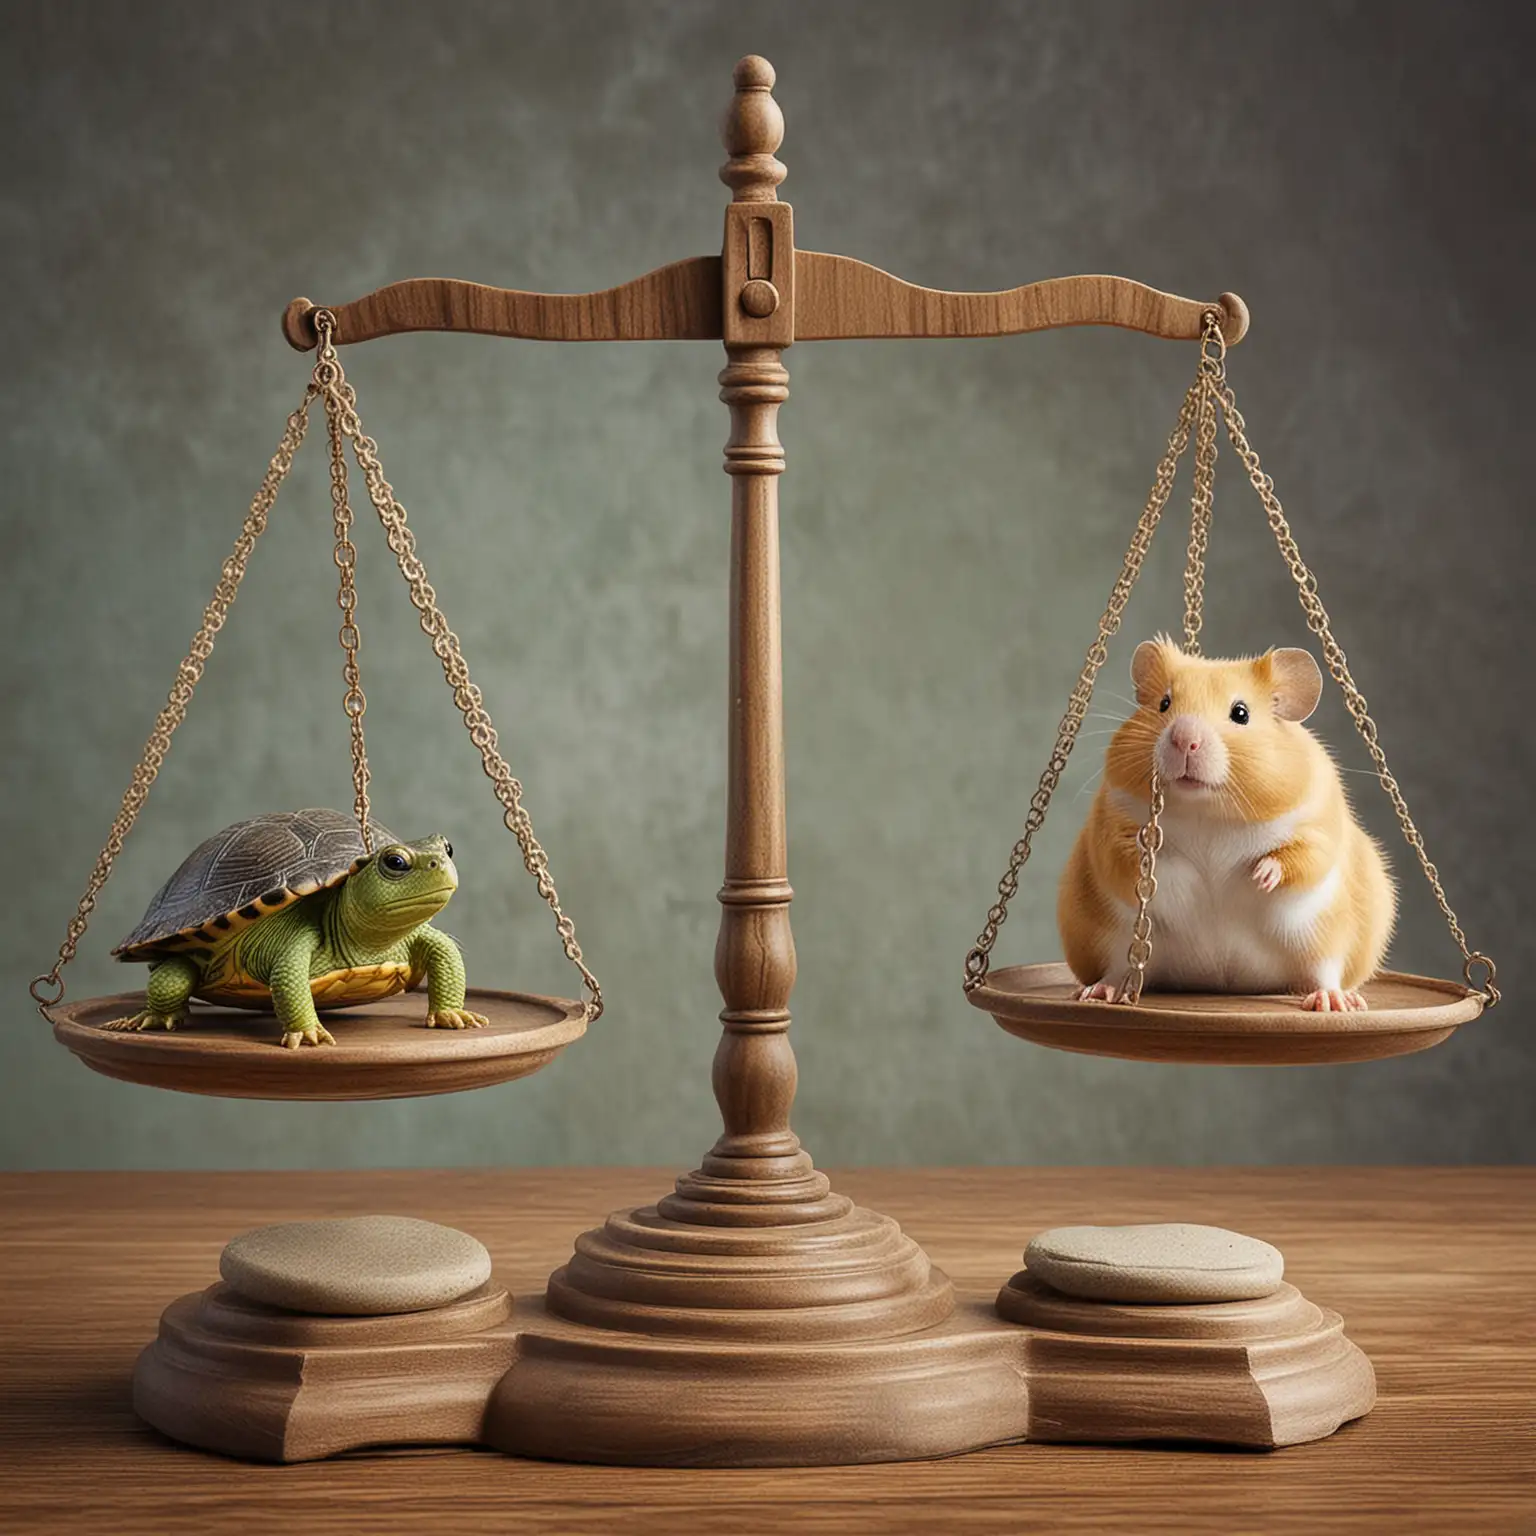 Symbolic Scales of Justice Turtle vs Hamster